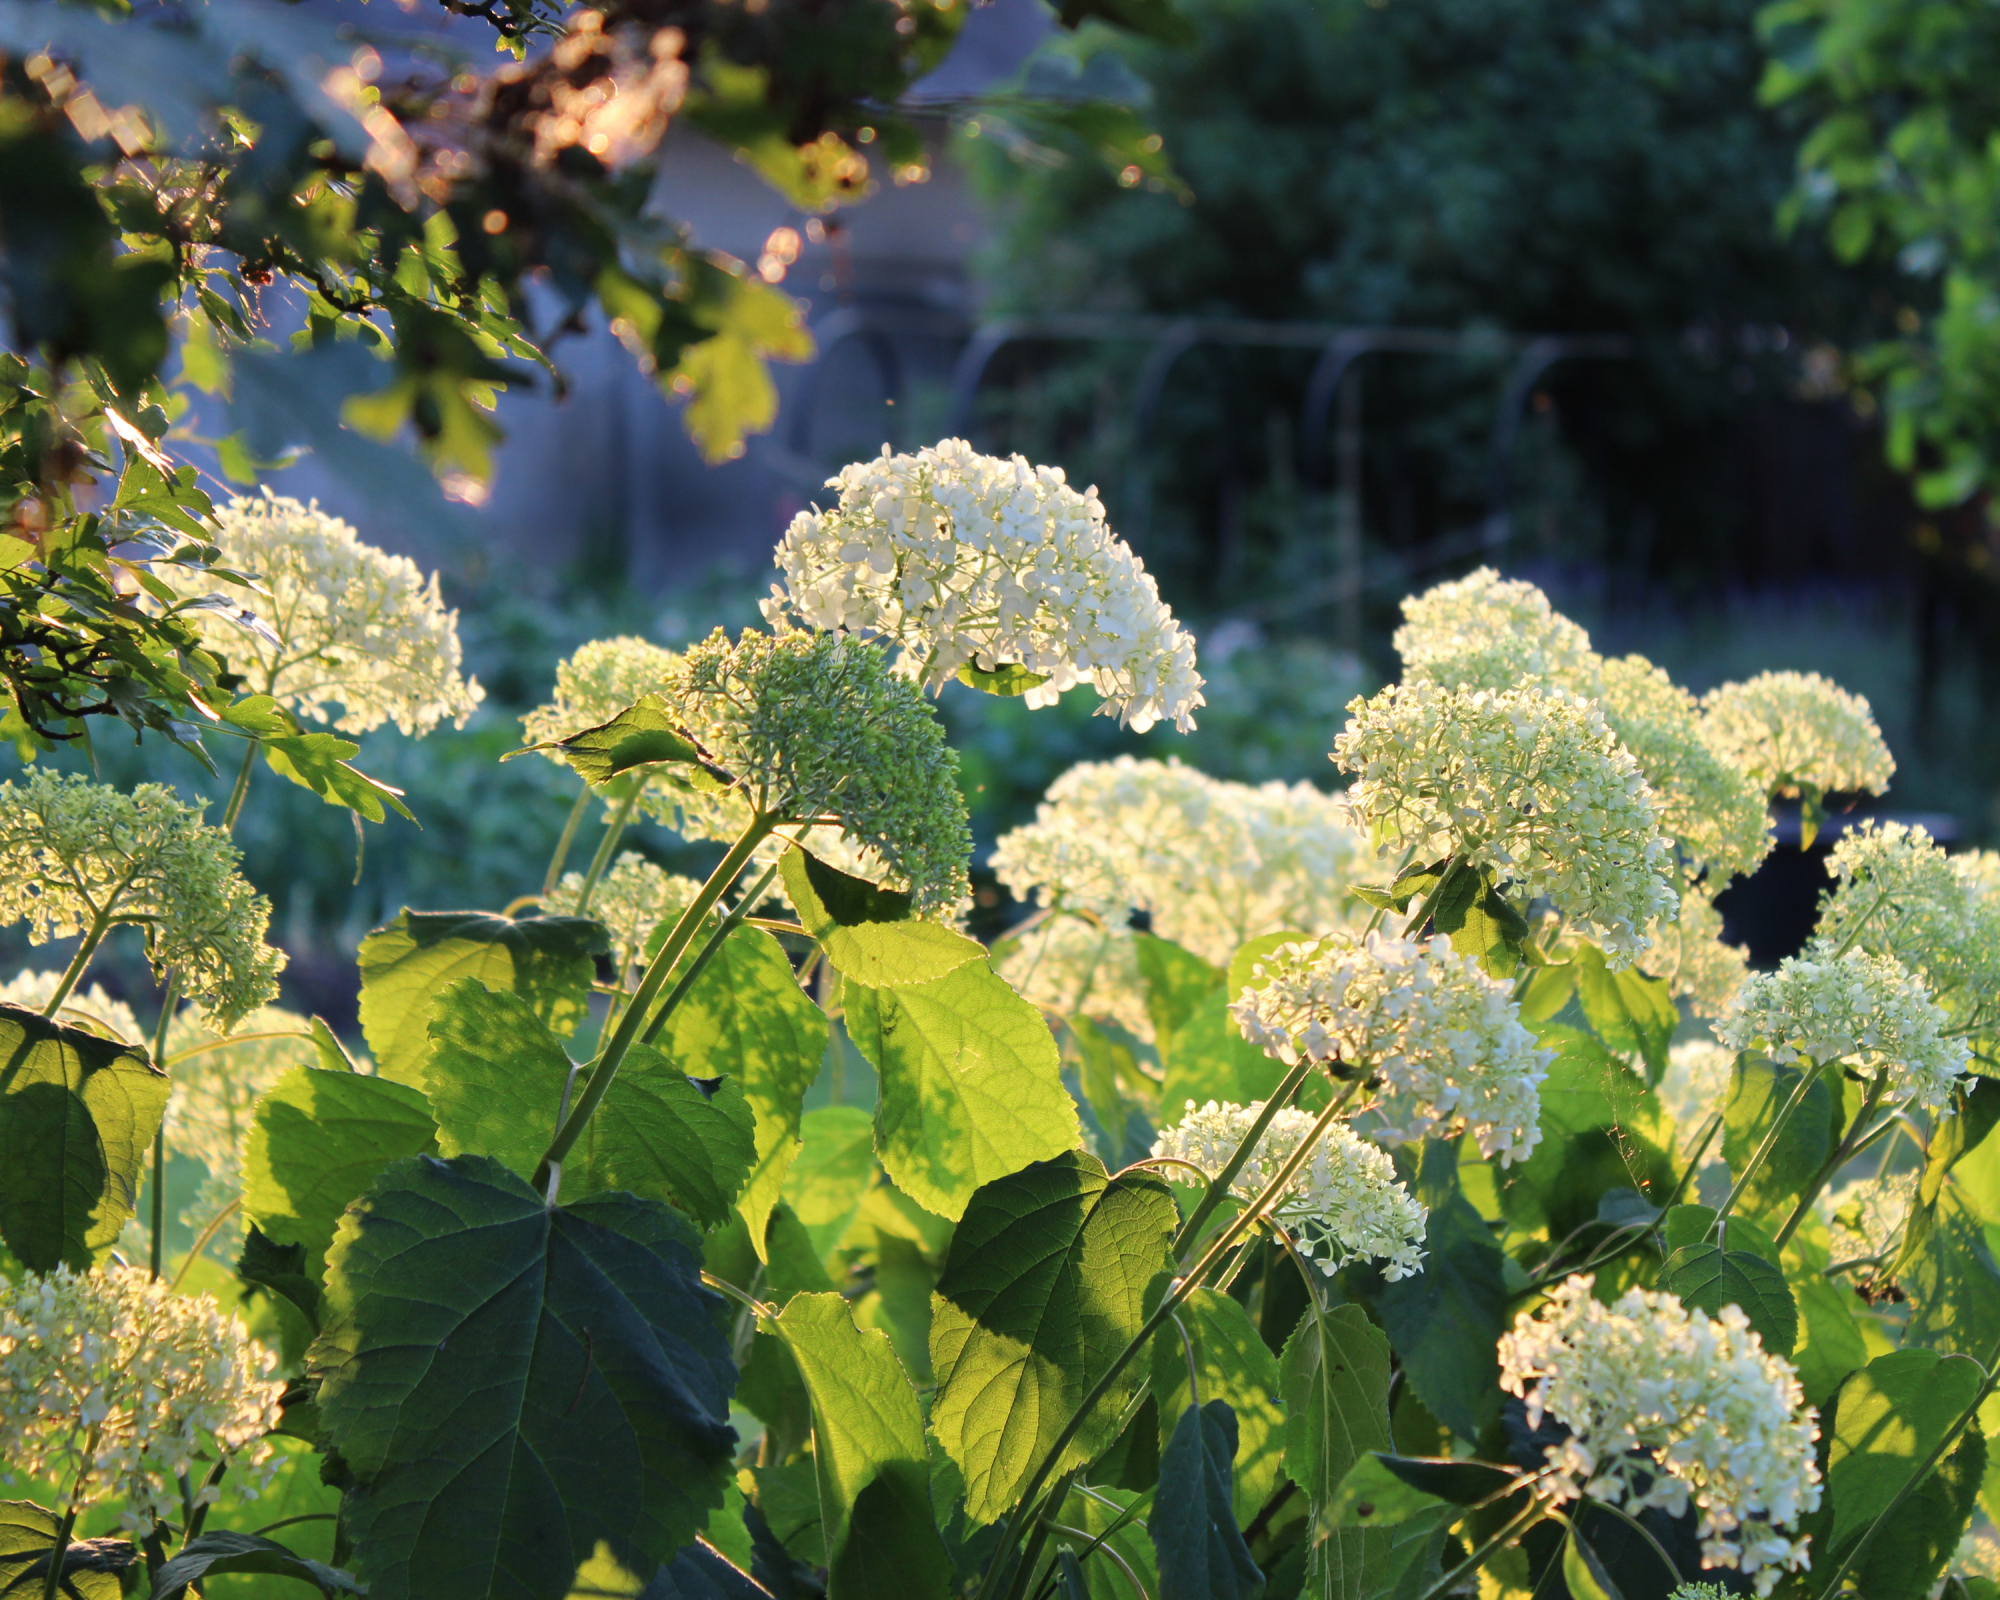 Blooming 'Annabelle' smooth hydrangeas in the sunlight